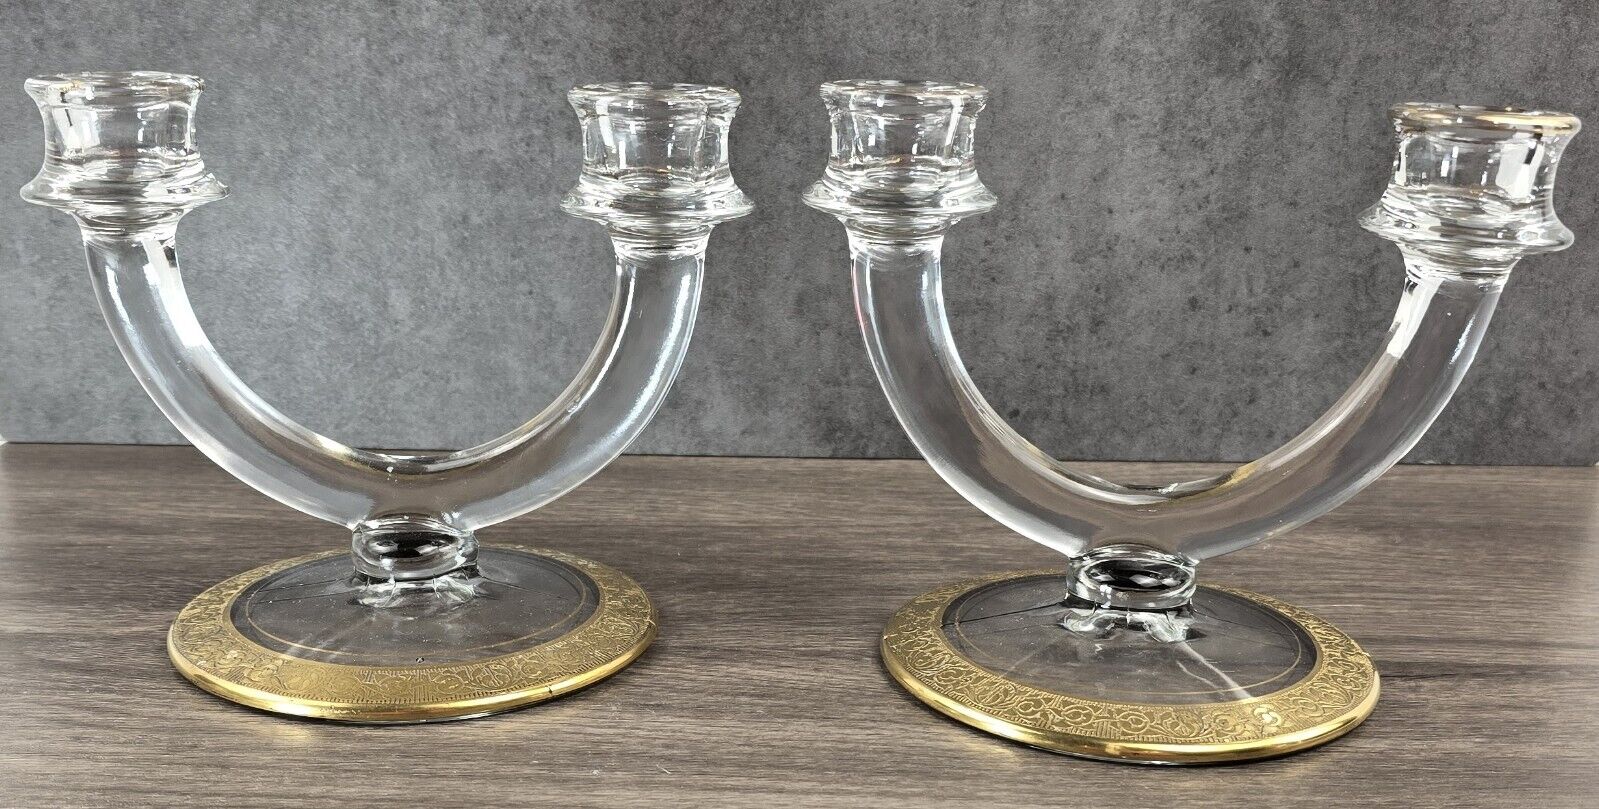 Set of 2 Double candlestick holders Rambler Rose Gold encrusted rims - lotus